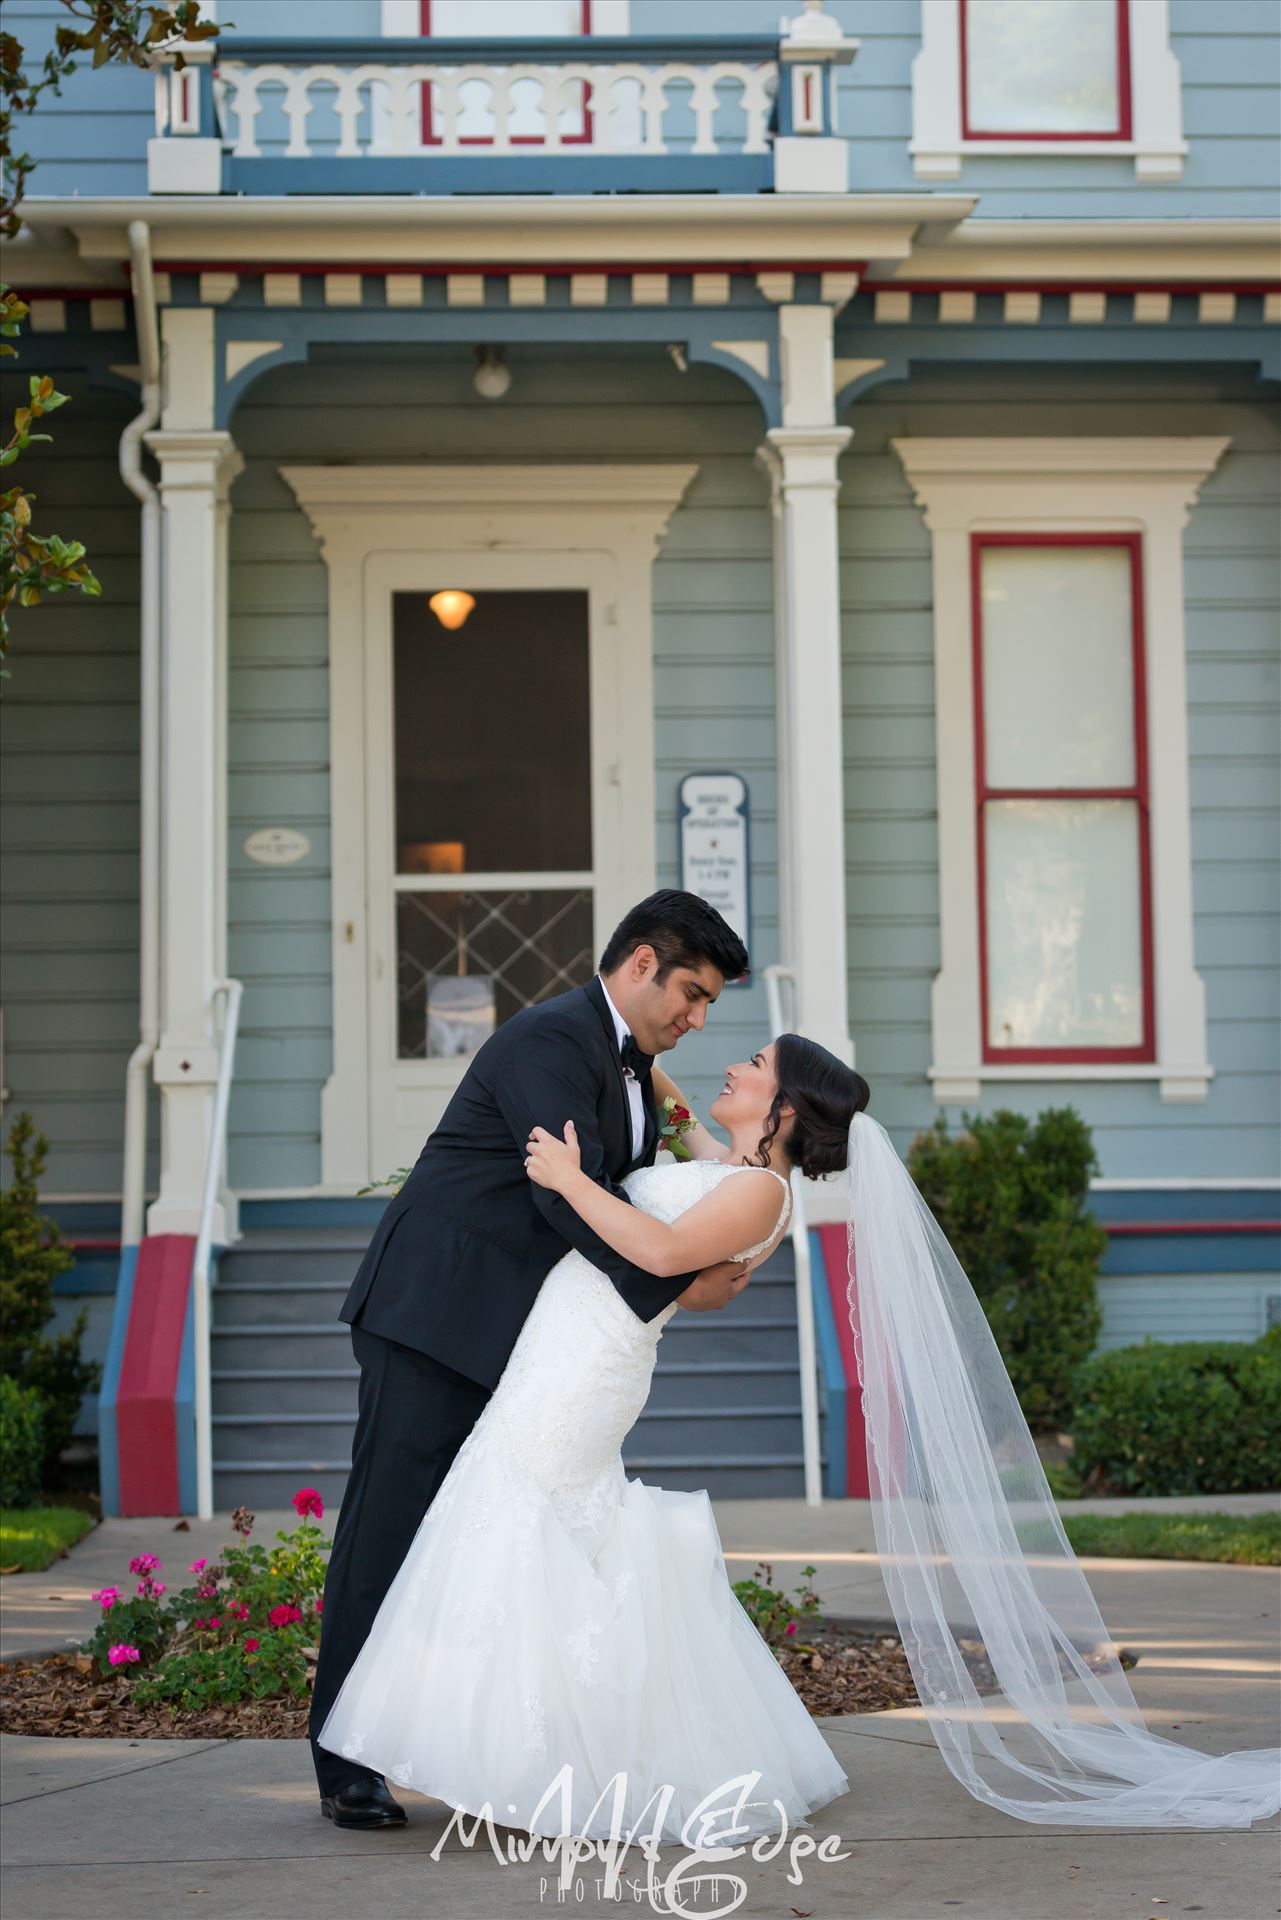 Port-9615.jpg - Modern and chic Downtown San Luis Obispo Wedding at the Historic Jack House and Gardens, wedding photography with love by Sarah Williams